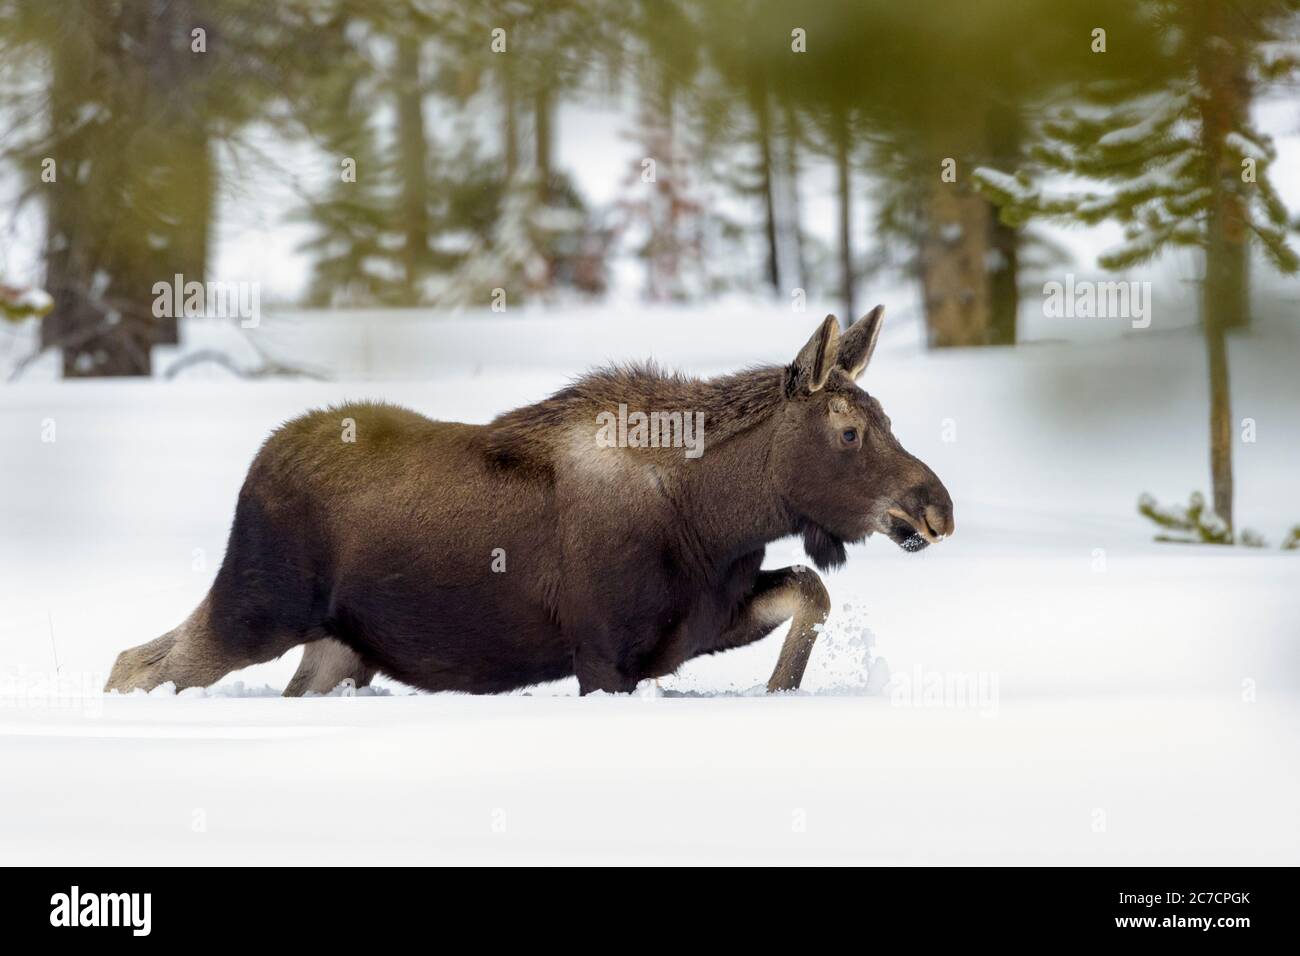 Elche (Alces Alces) Wandern im Schnee, Lamar Valley, Yellowstone National Park, Wyoming, USA. Stockfoto